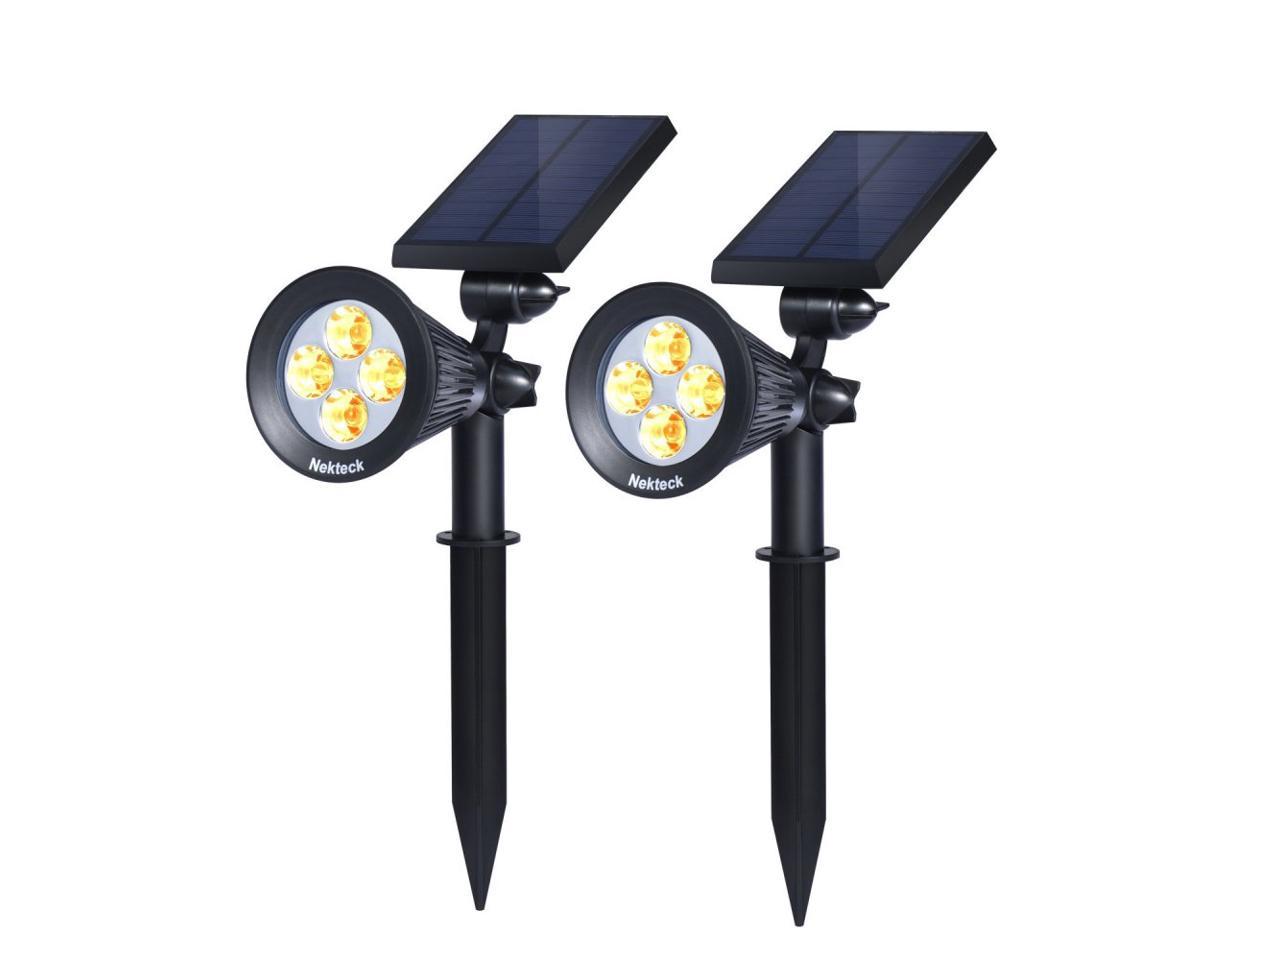 Walkway Nekteck Solar Lights Outdoor Yard Landscaping Decorative 2 in 1 Outdoor Solar Spotlights with Activated Auto On/Off for Pathway Patio Ground Garden 2 Pack,6000K Driveway 